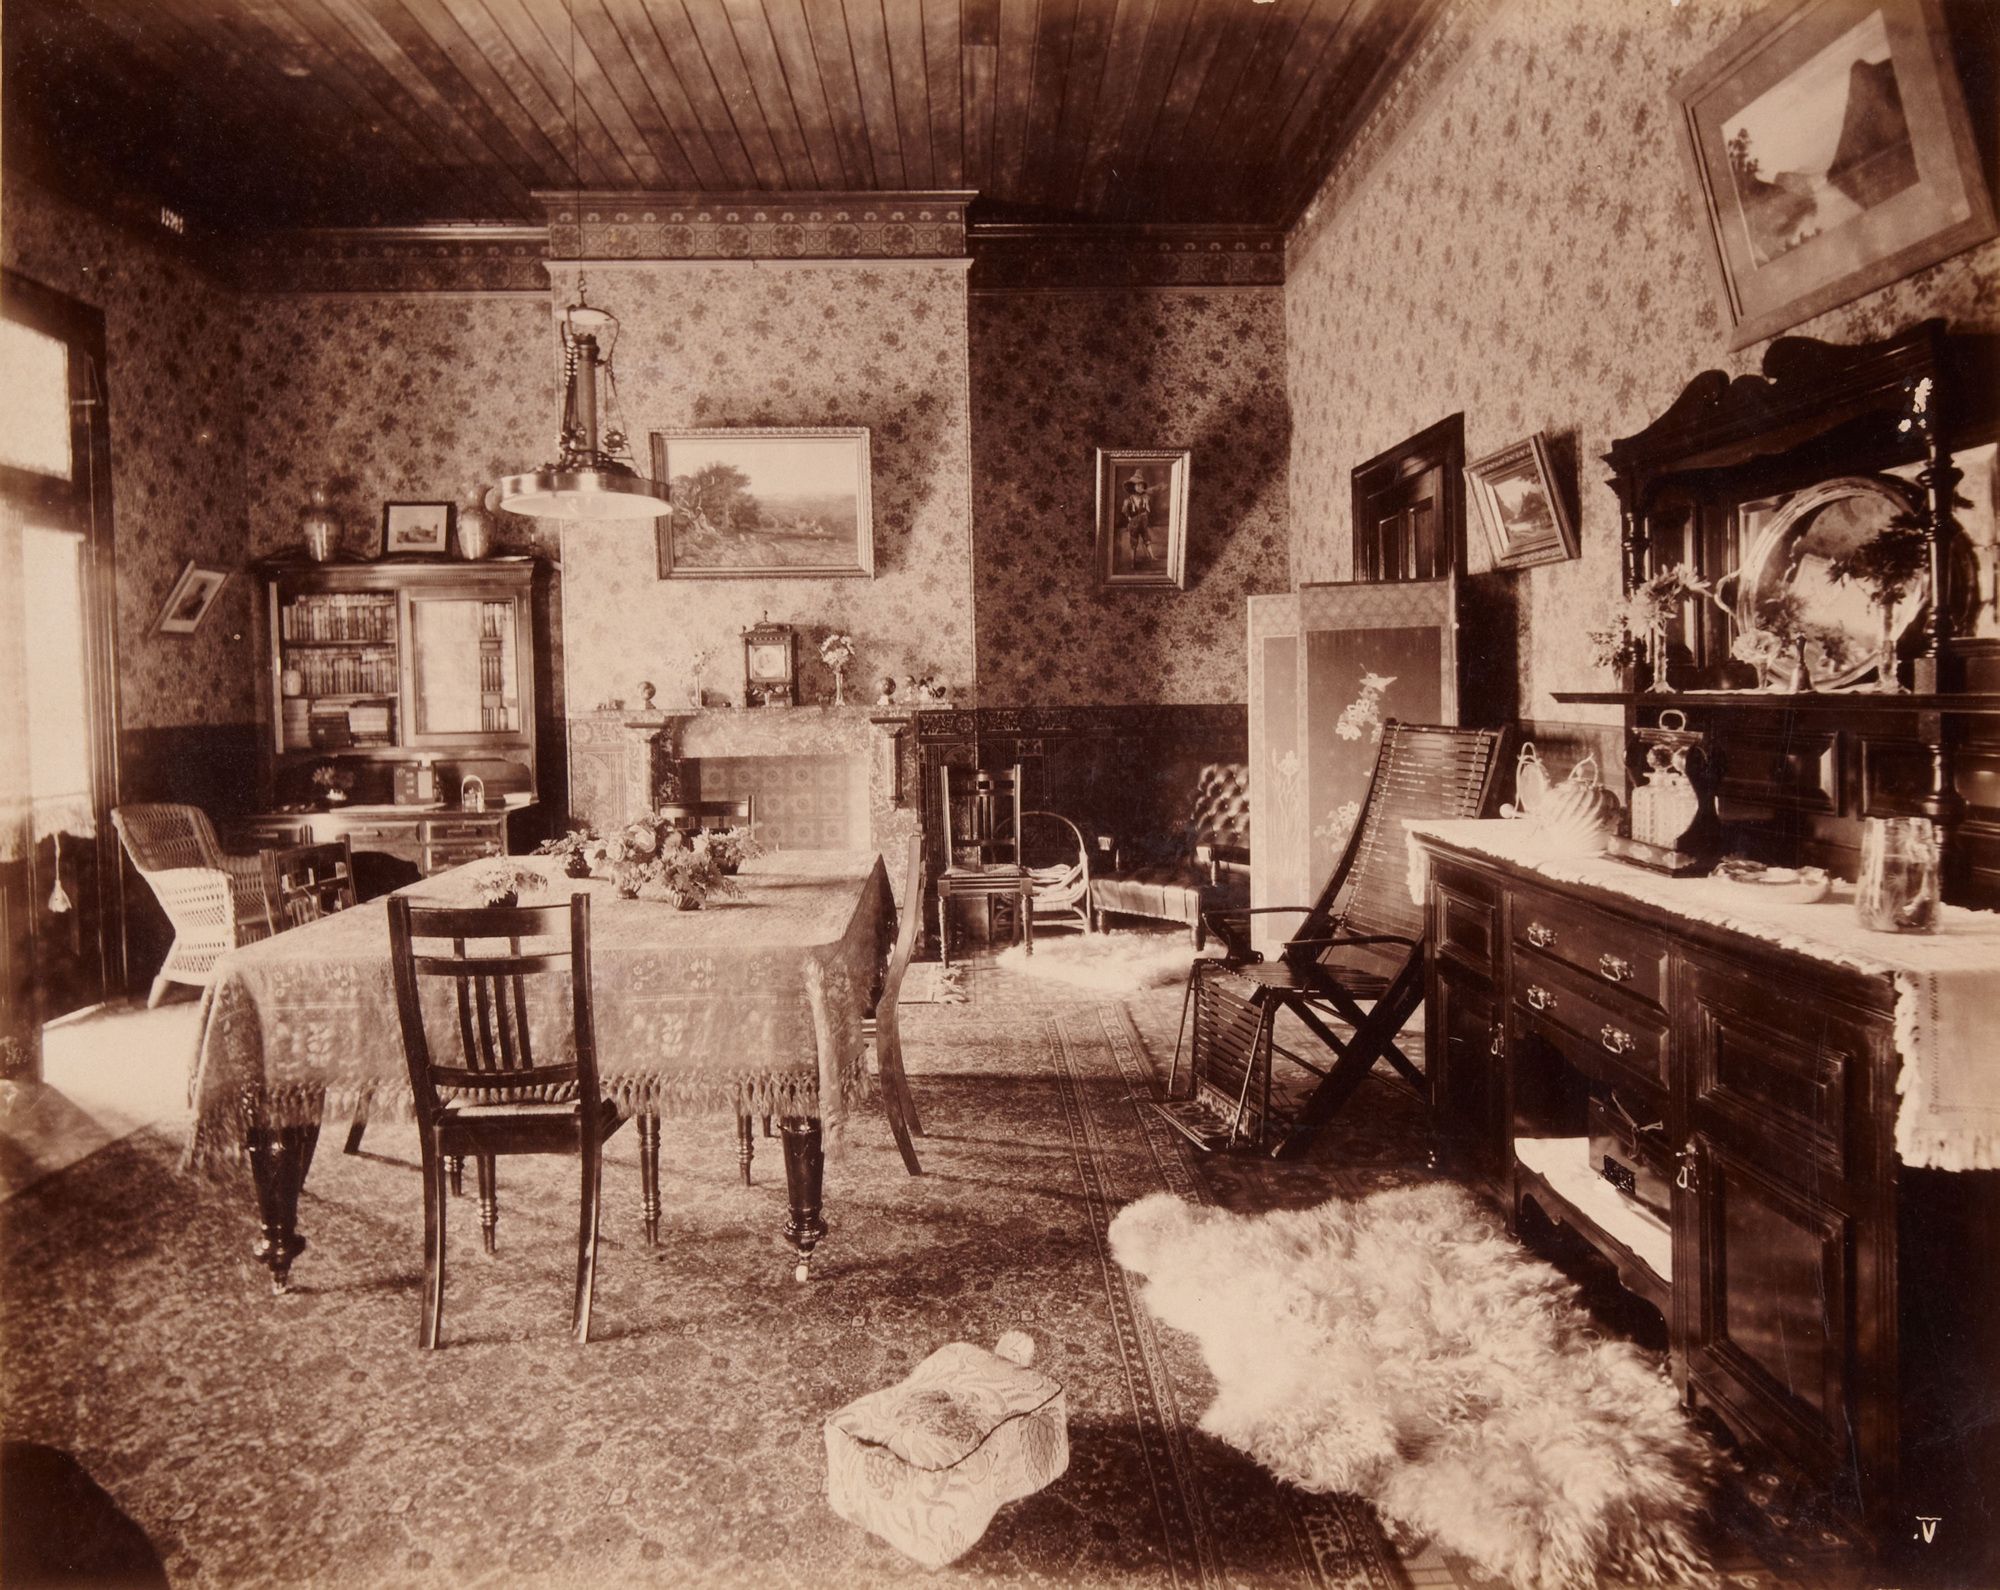 The dining room of 'Kioto', a house on the Belltrees estate, Scone, Joseph Check, 1893